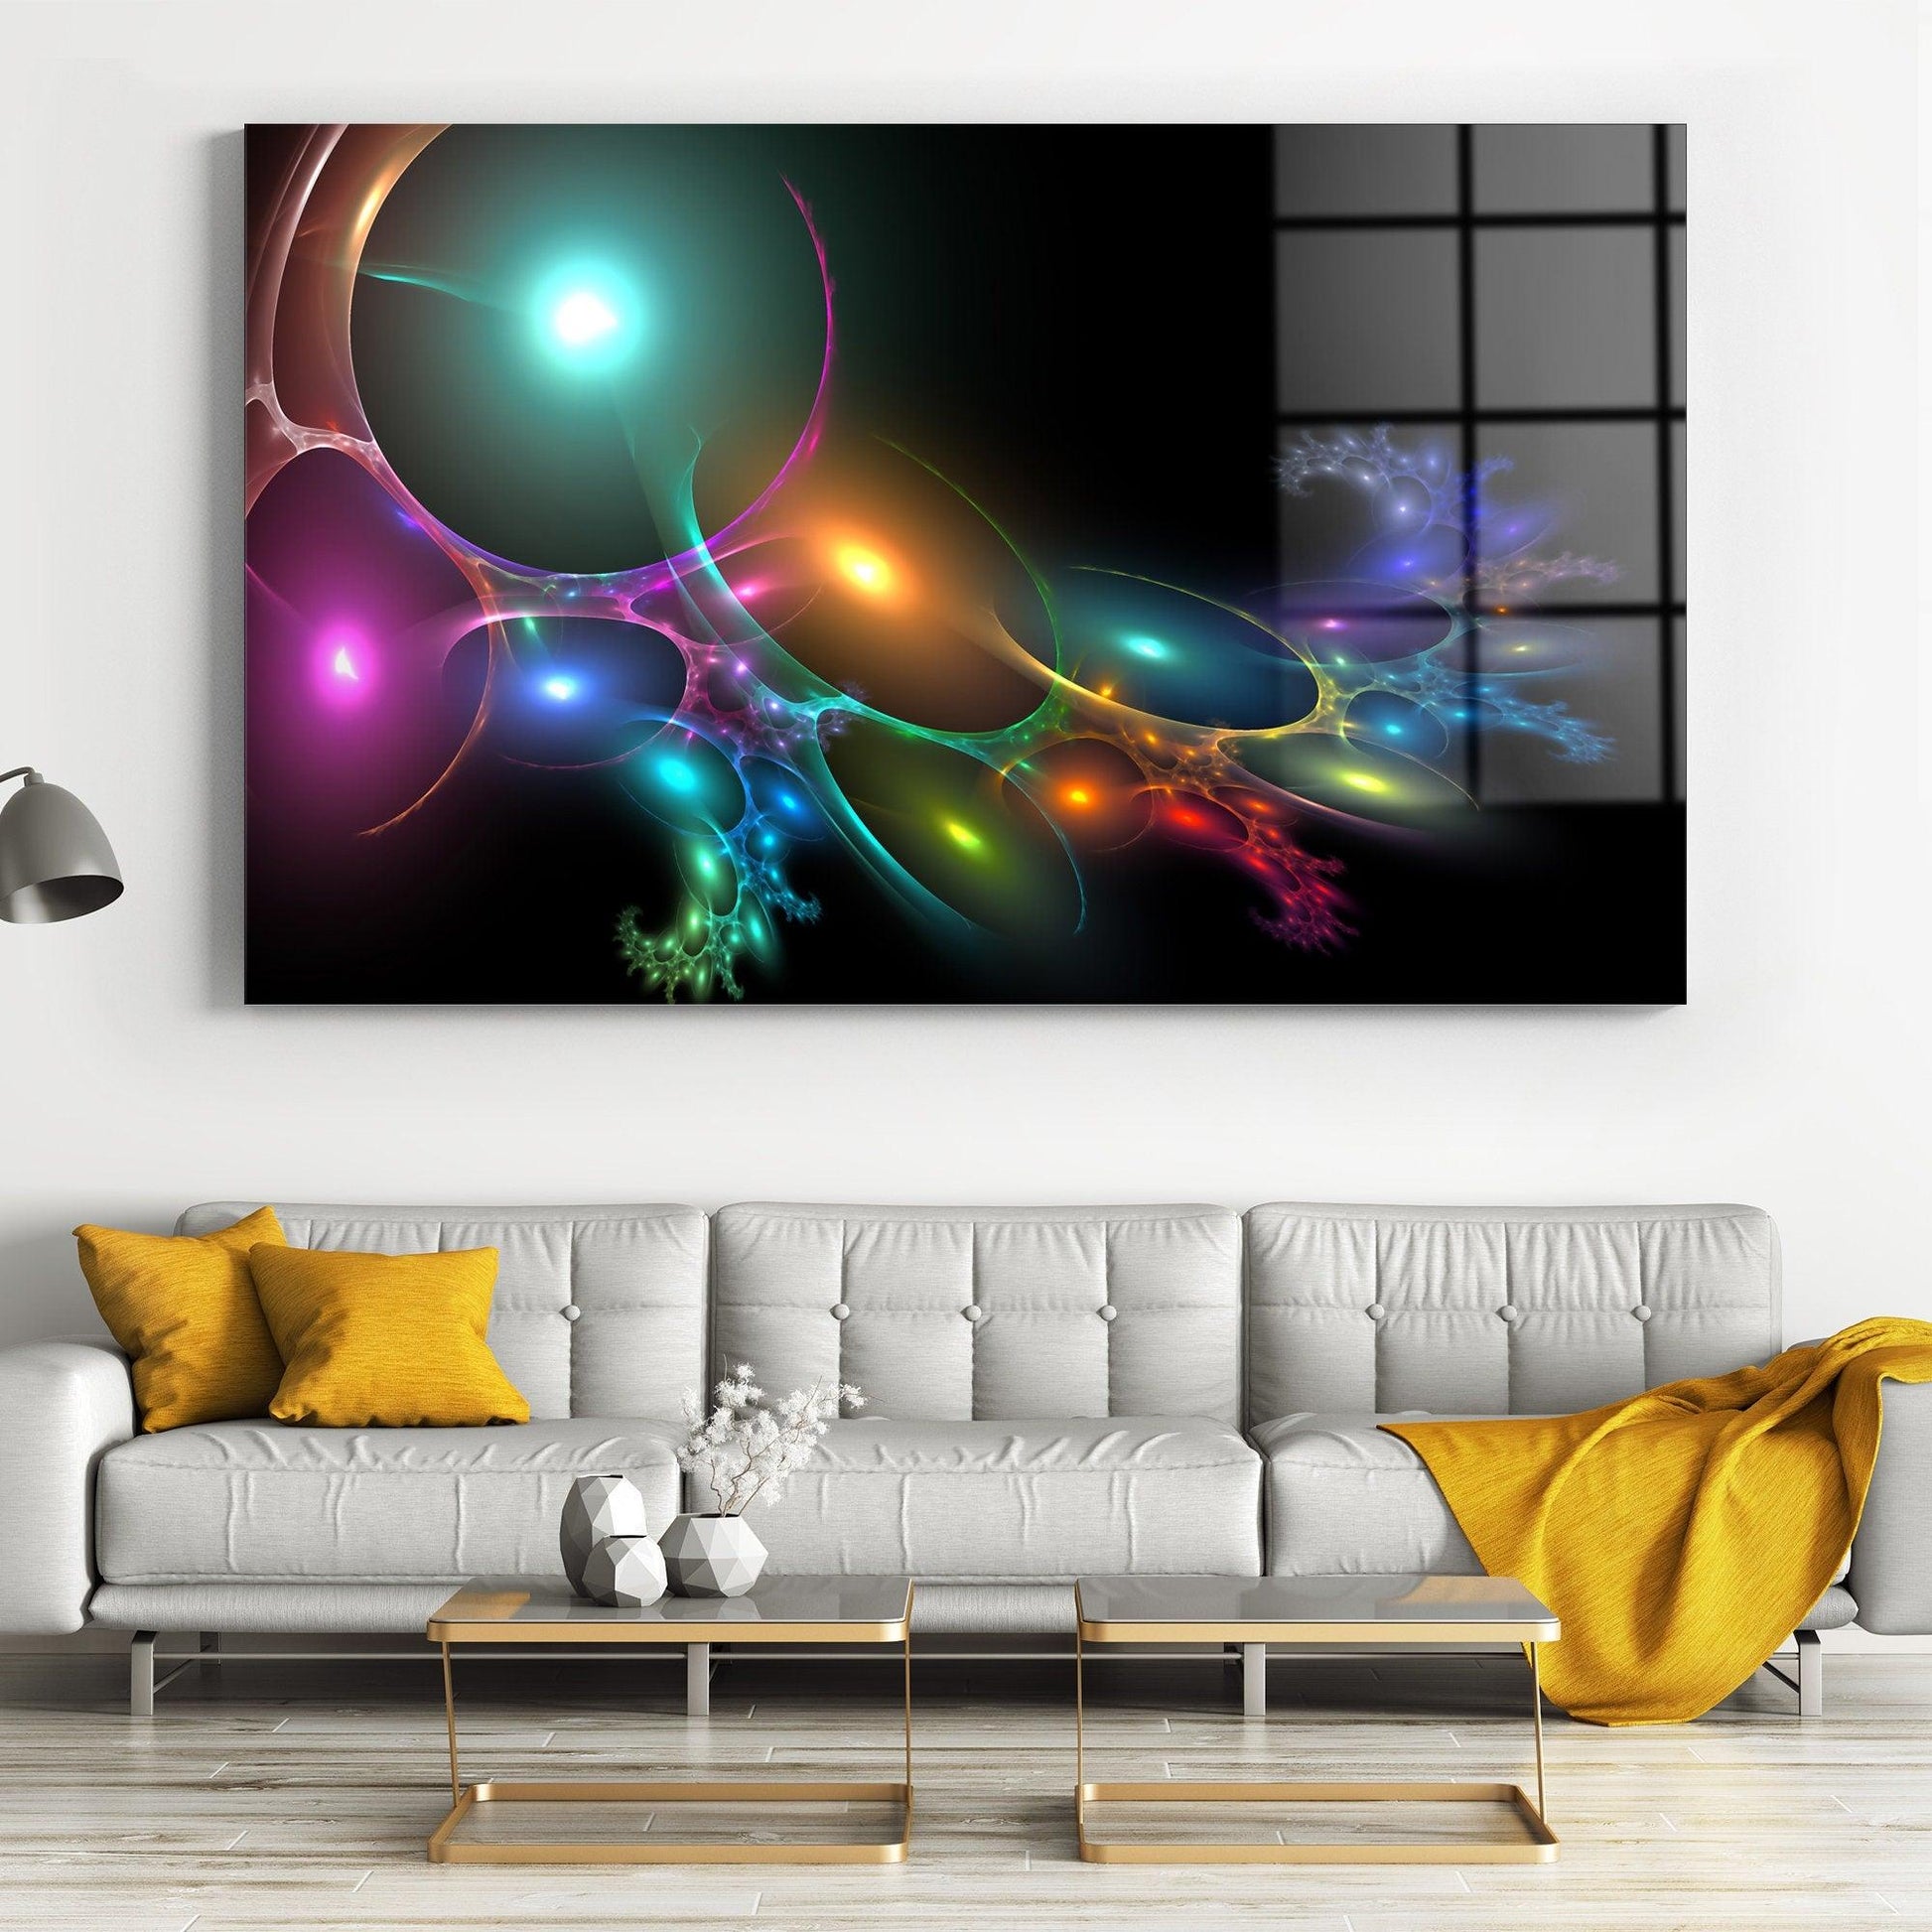 Wonderful Acrylic Painting | Abstract Wall Decor, Elegant Abstract Art for Home, Elegant design glass wall art, canvas art for sale